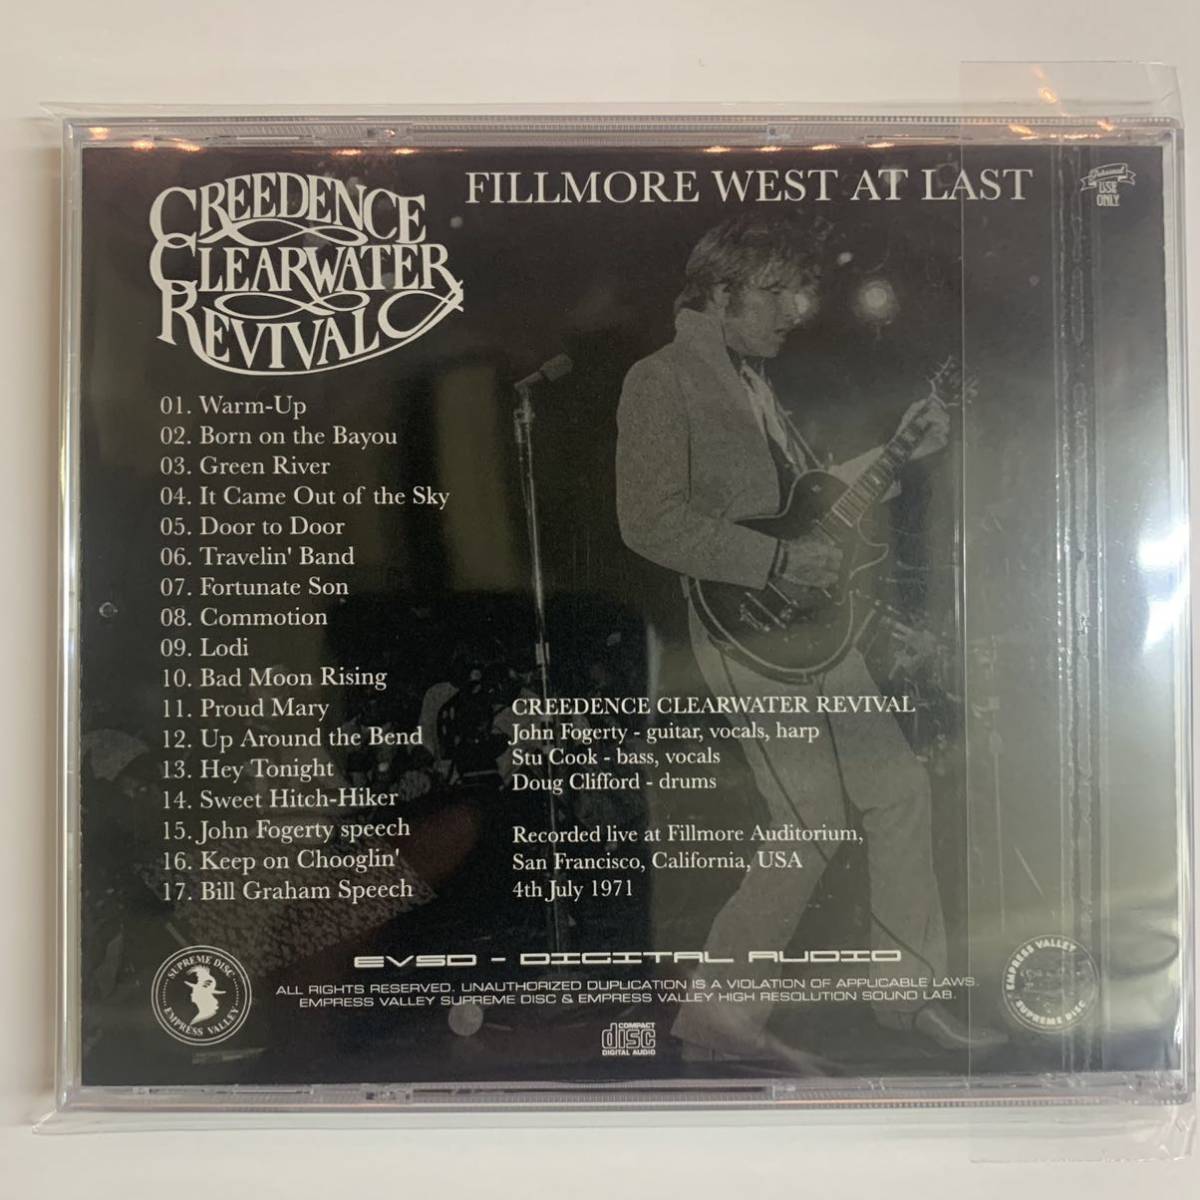 CCR CREEDENCE CLEARWATER REVIVAL / FILLMORE WEST AT LAST (CD) Empress Valley Supreme Disk フィルモア最後の日！決定盤！_画像2